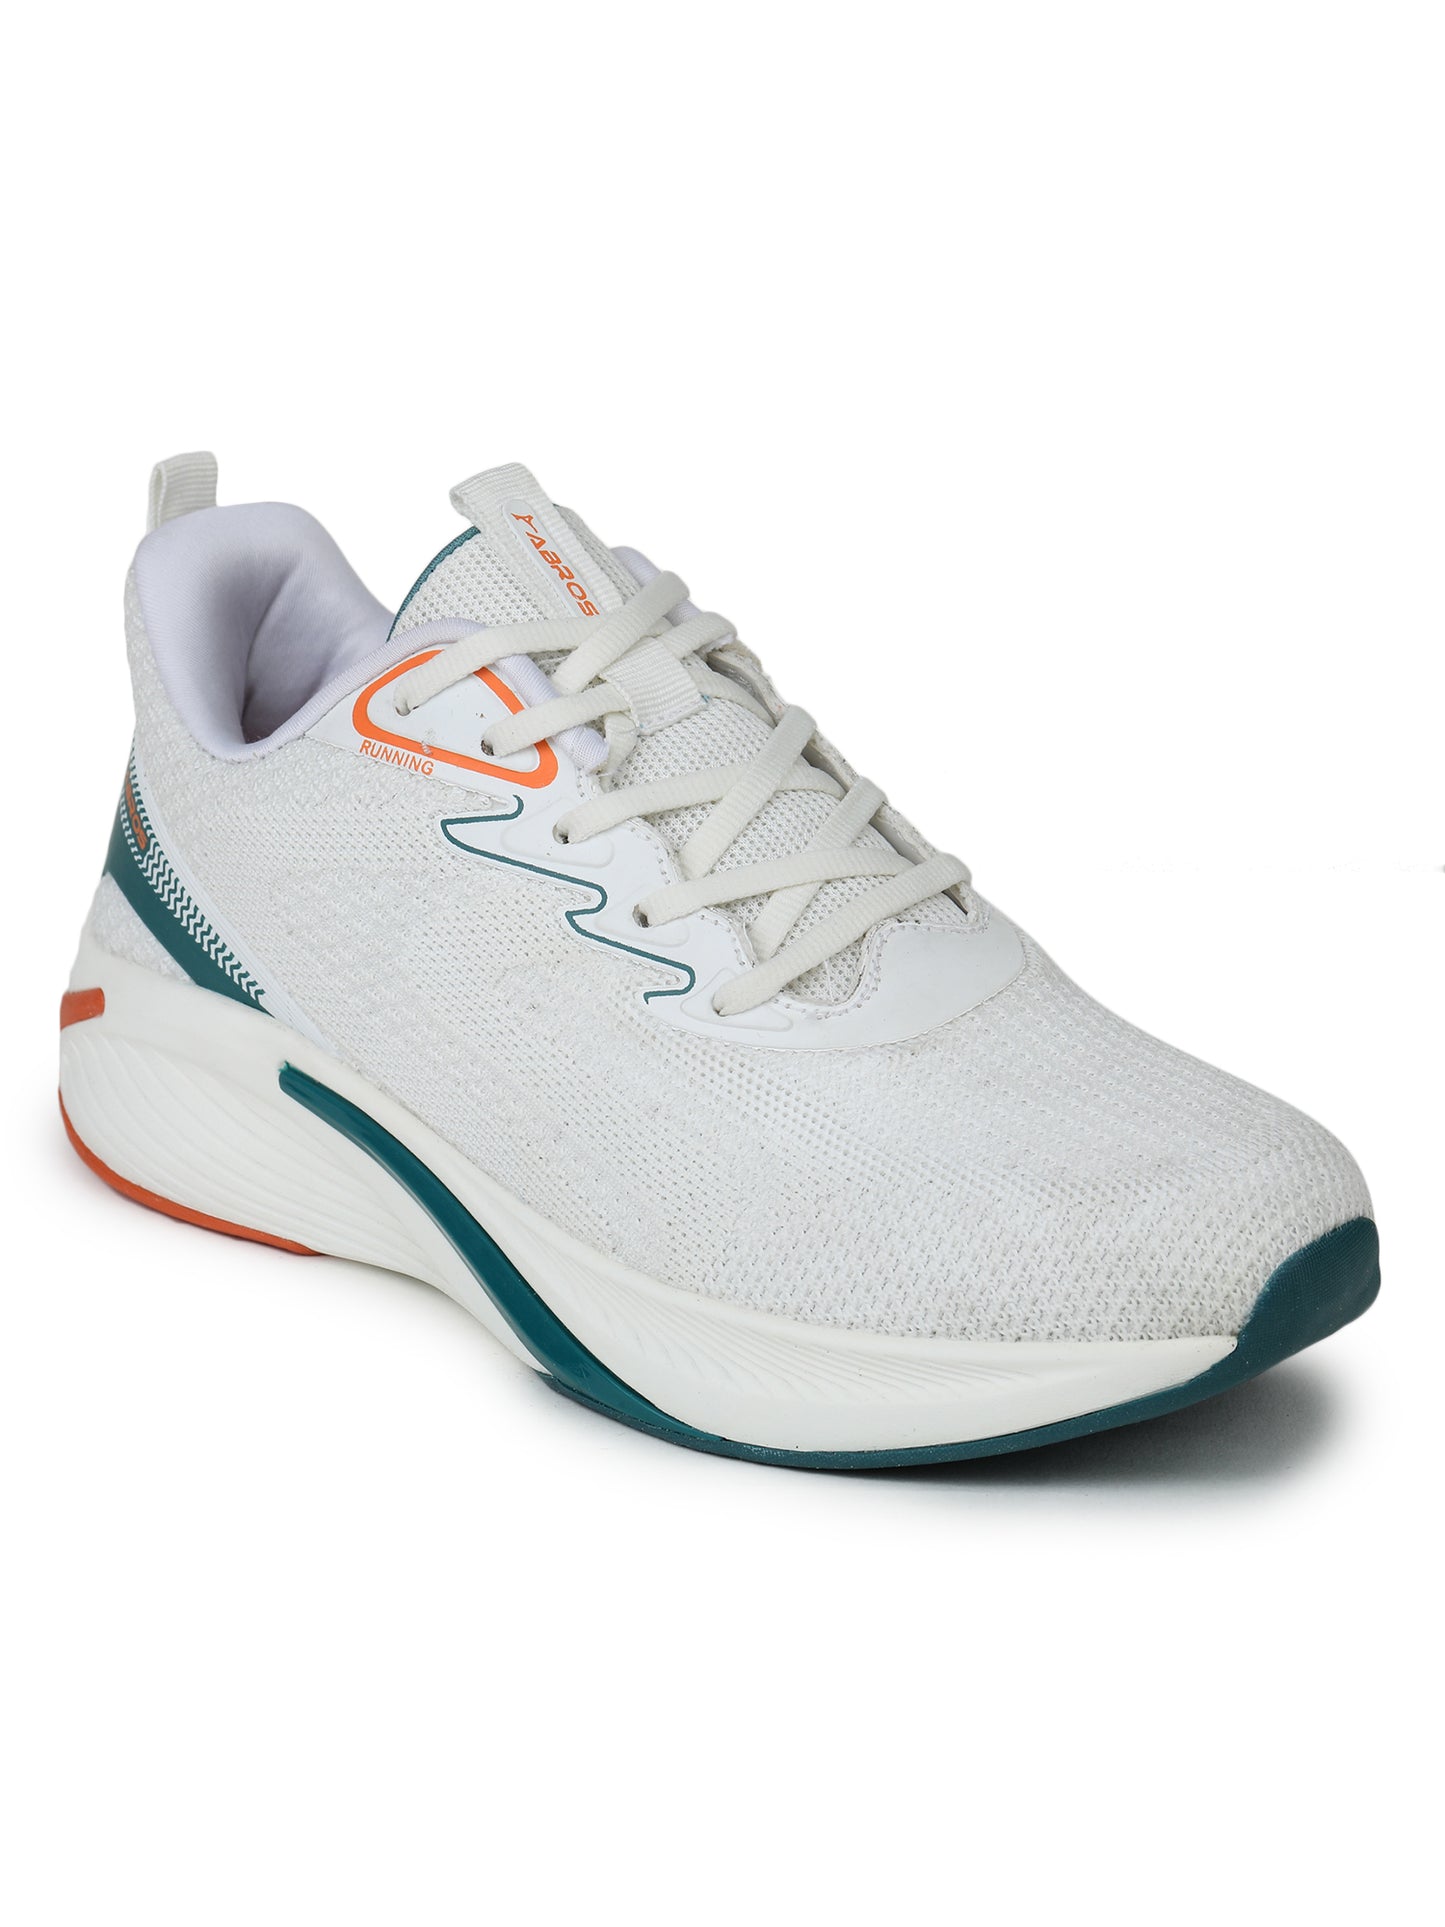 ABROS STARE-ON SPORT-SHOES For MEN'S